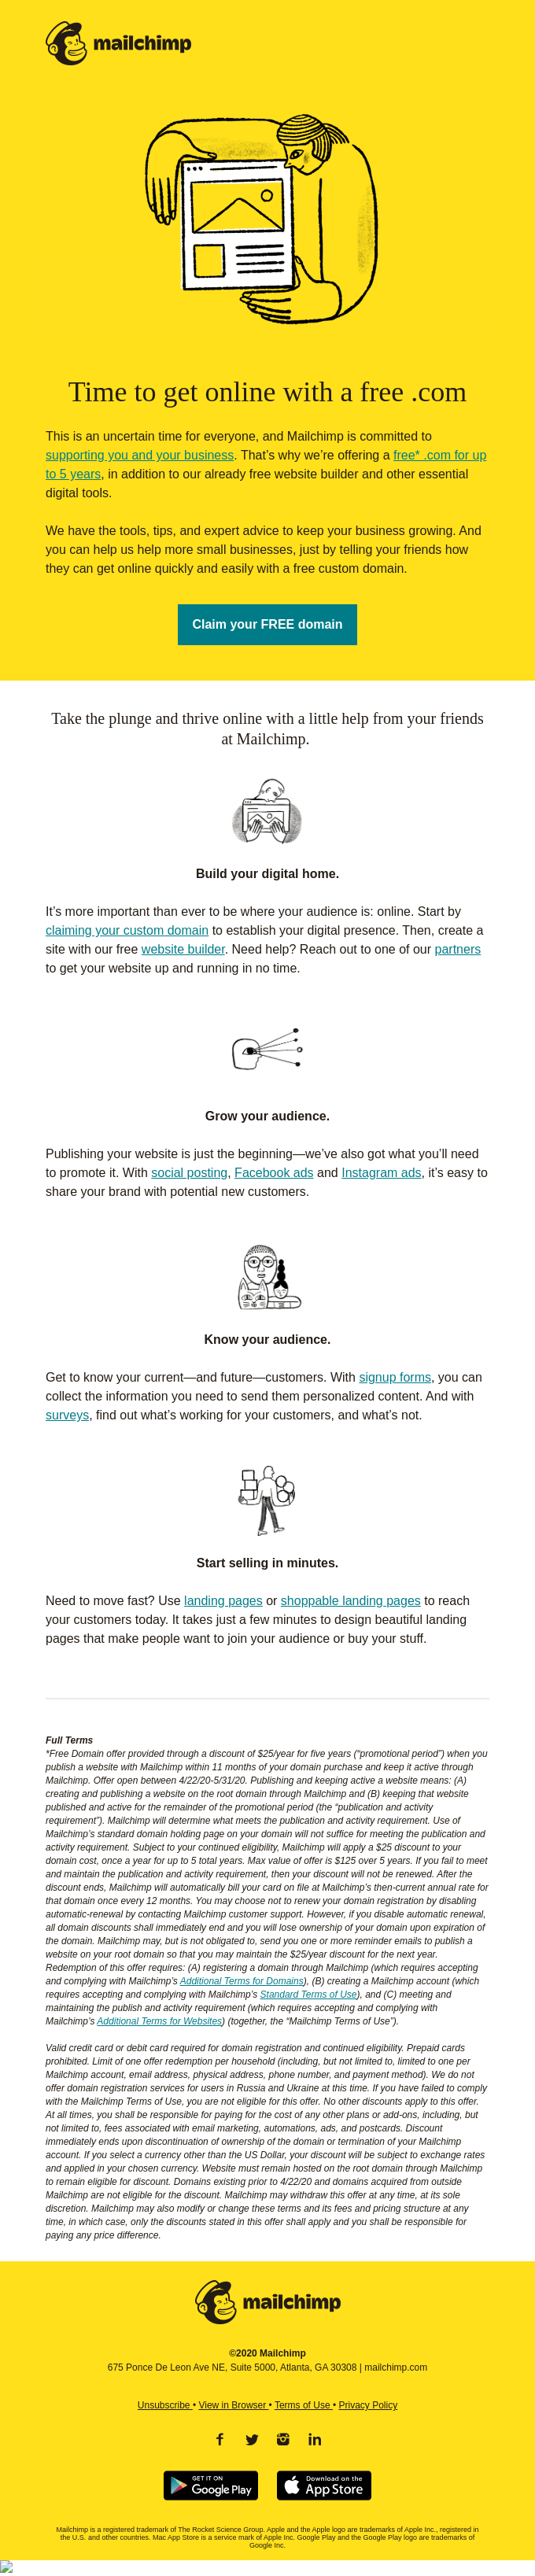 Get Your Free .com: Time to Get Online - MailChimp Email Newsletter